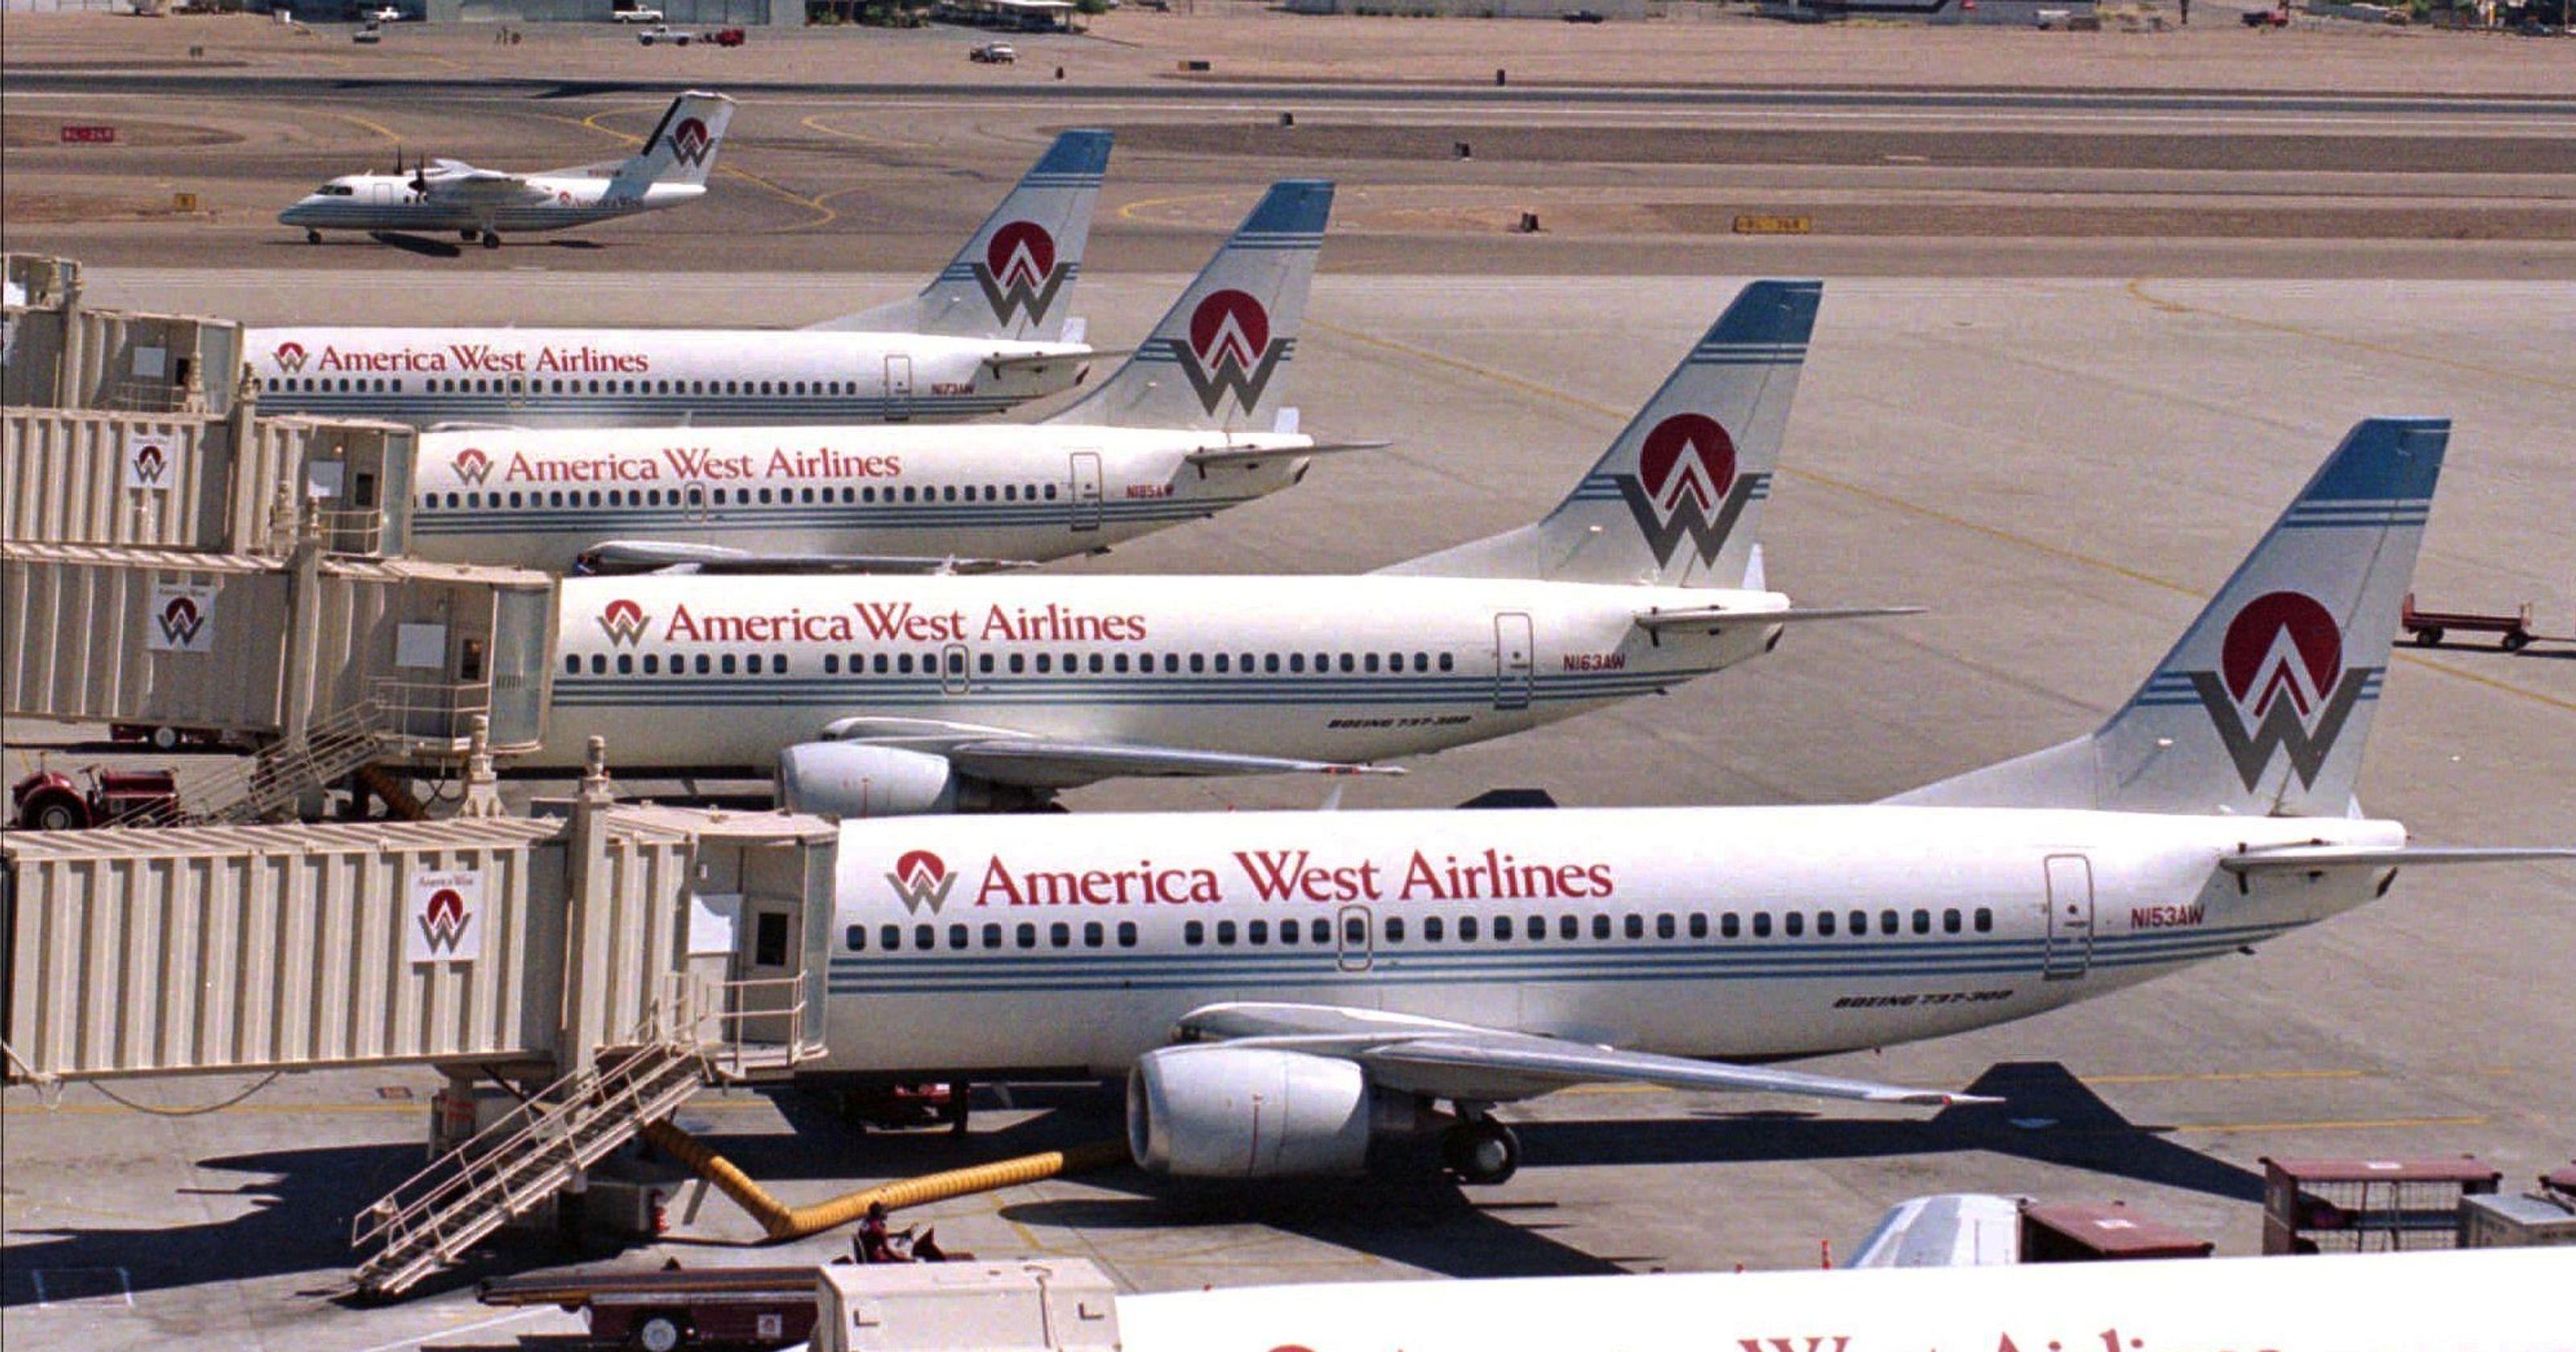 American West Airline Logo - Devoted former workers keep America West's memory alive